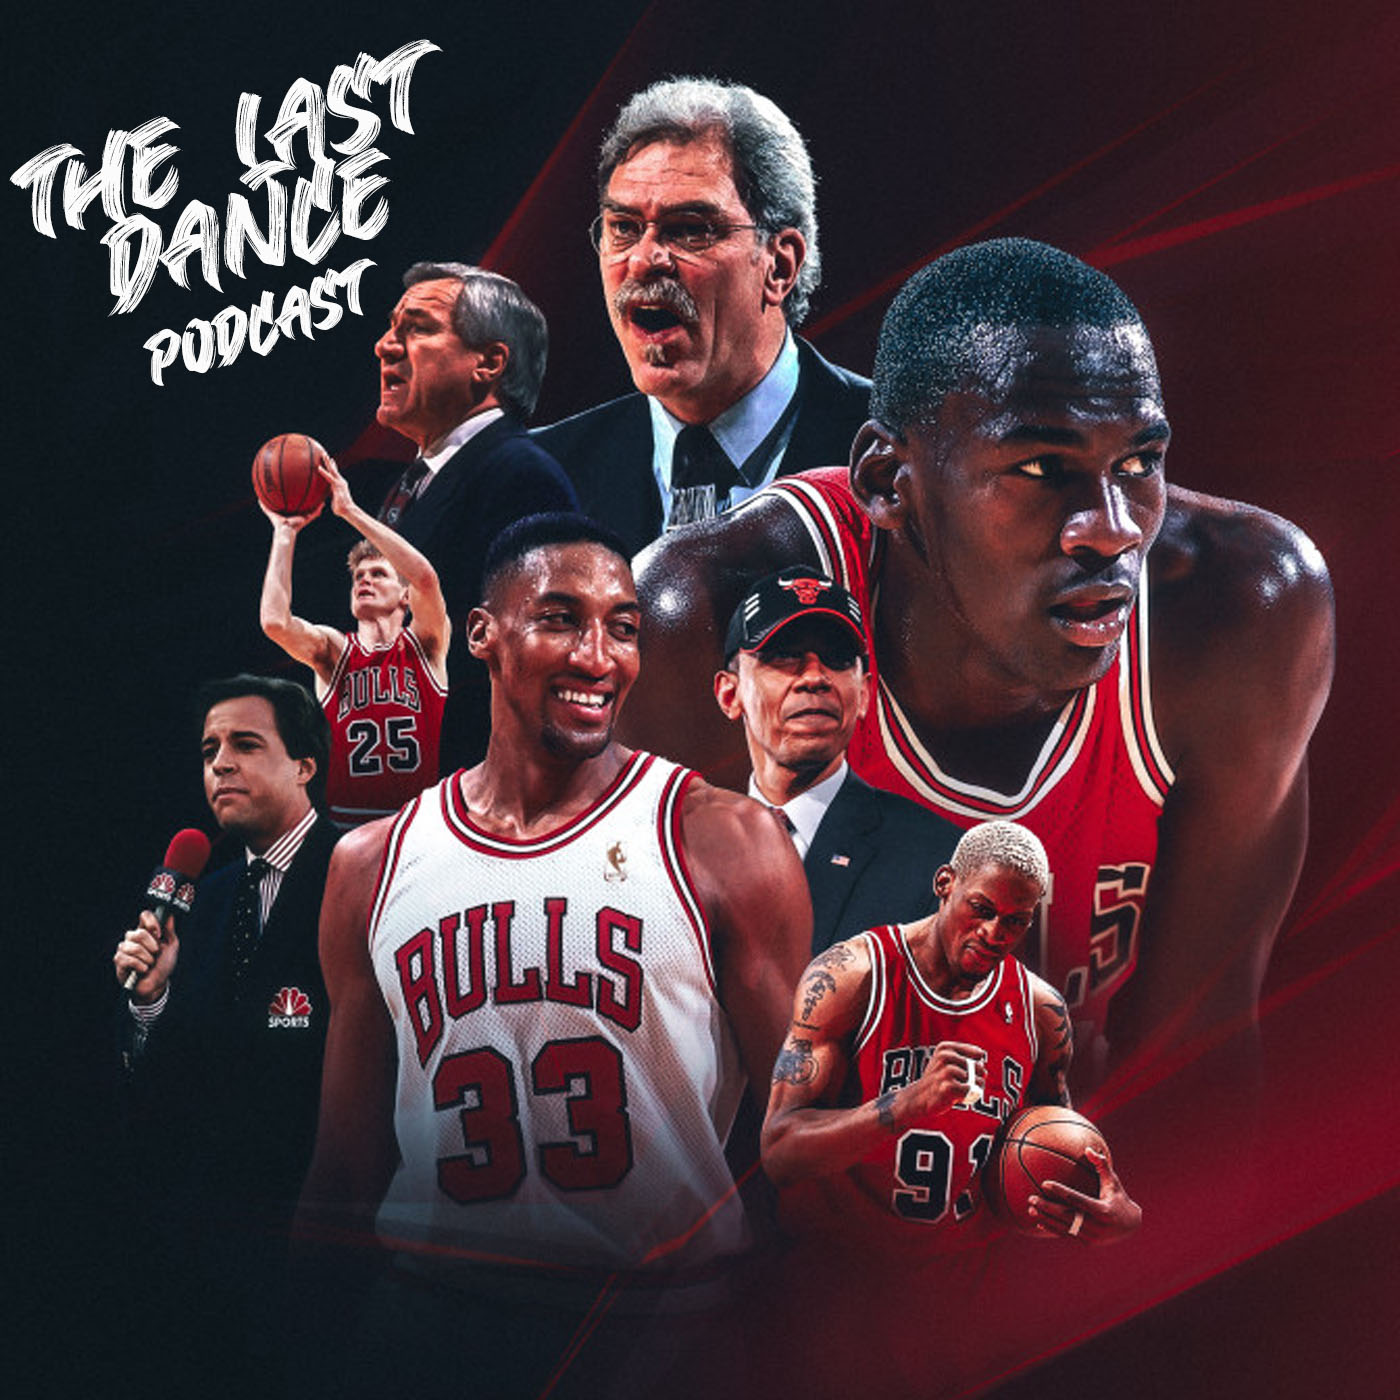 Crux Media Group Presents "The Last Dance": Got To Be The Shoes